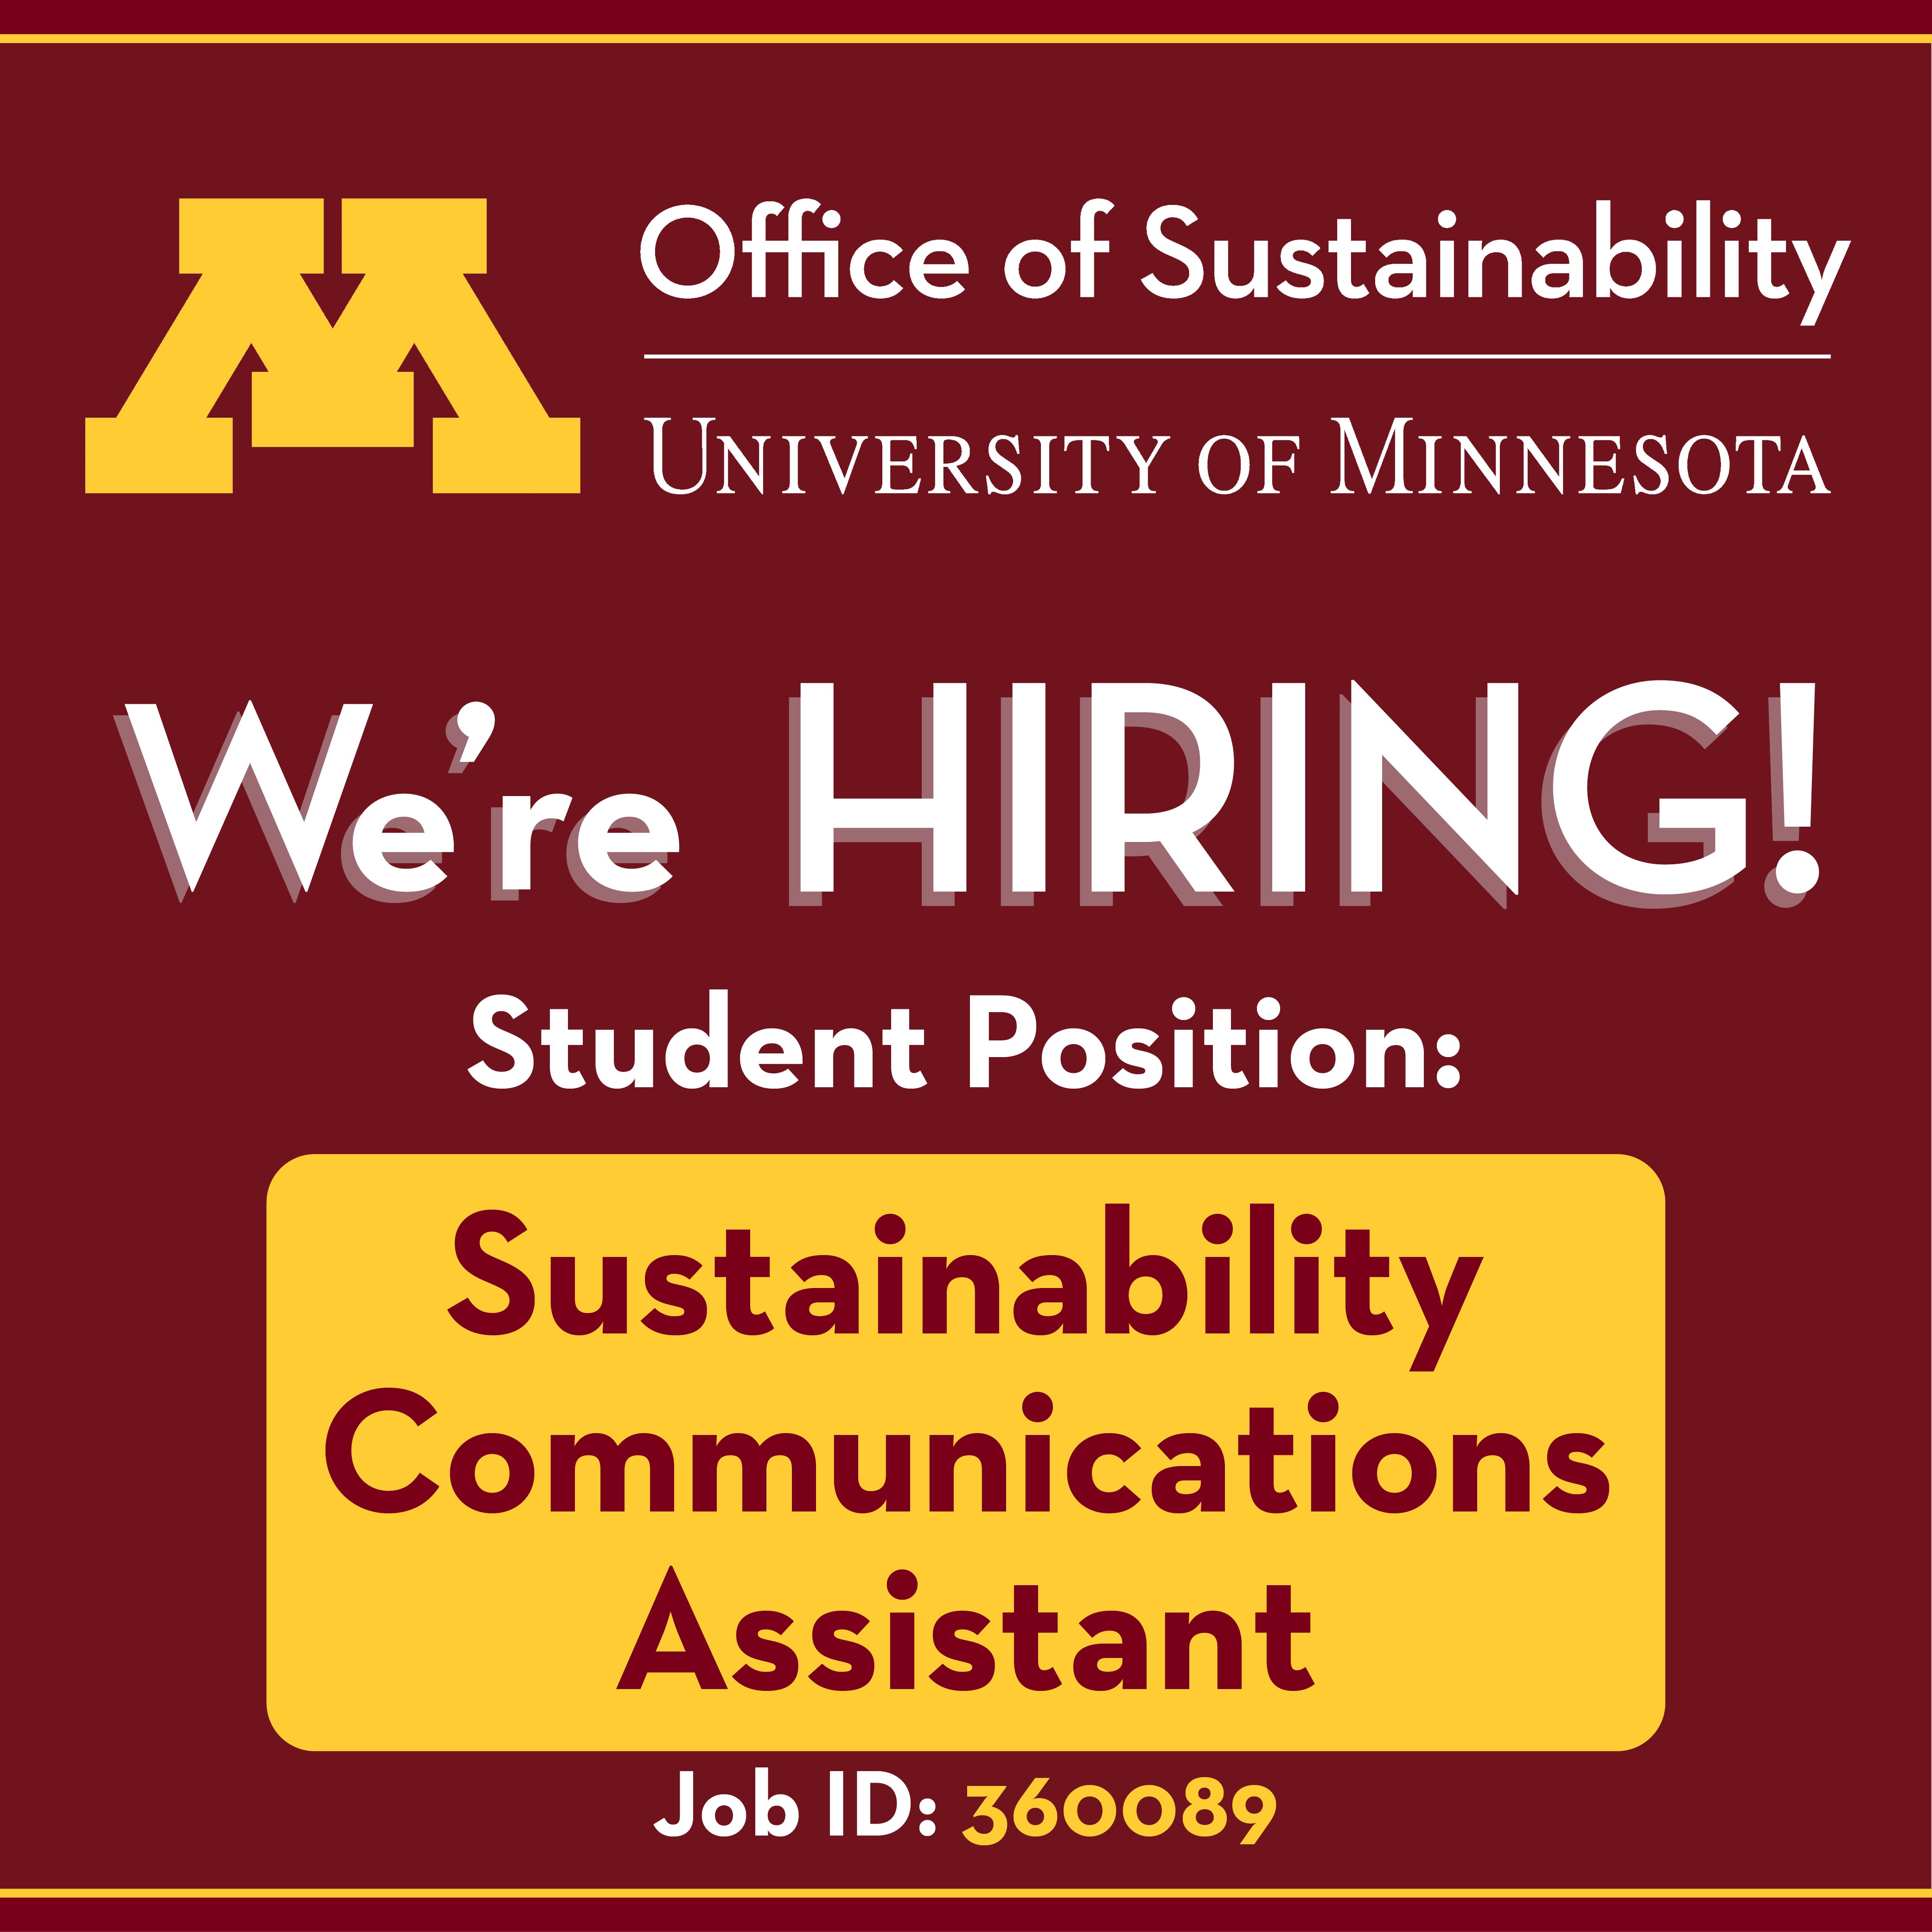 Maroon graphic showing "we're hiring" student position sustainability communications assistant. Job ID is 360089